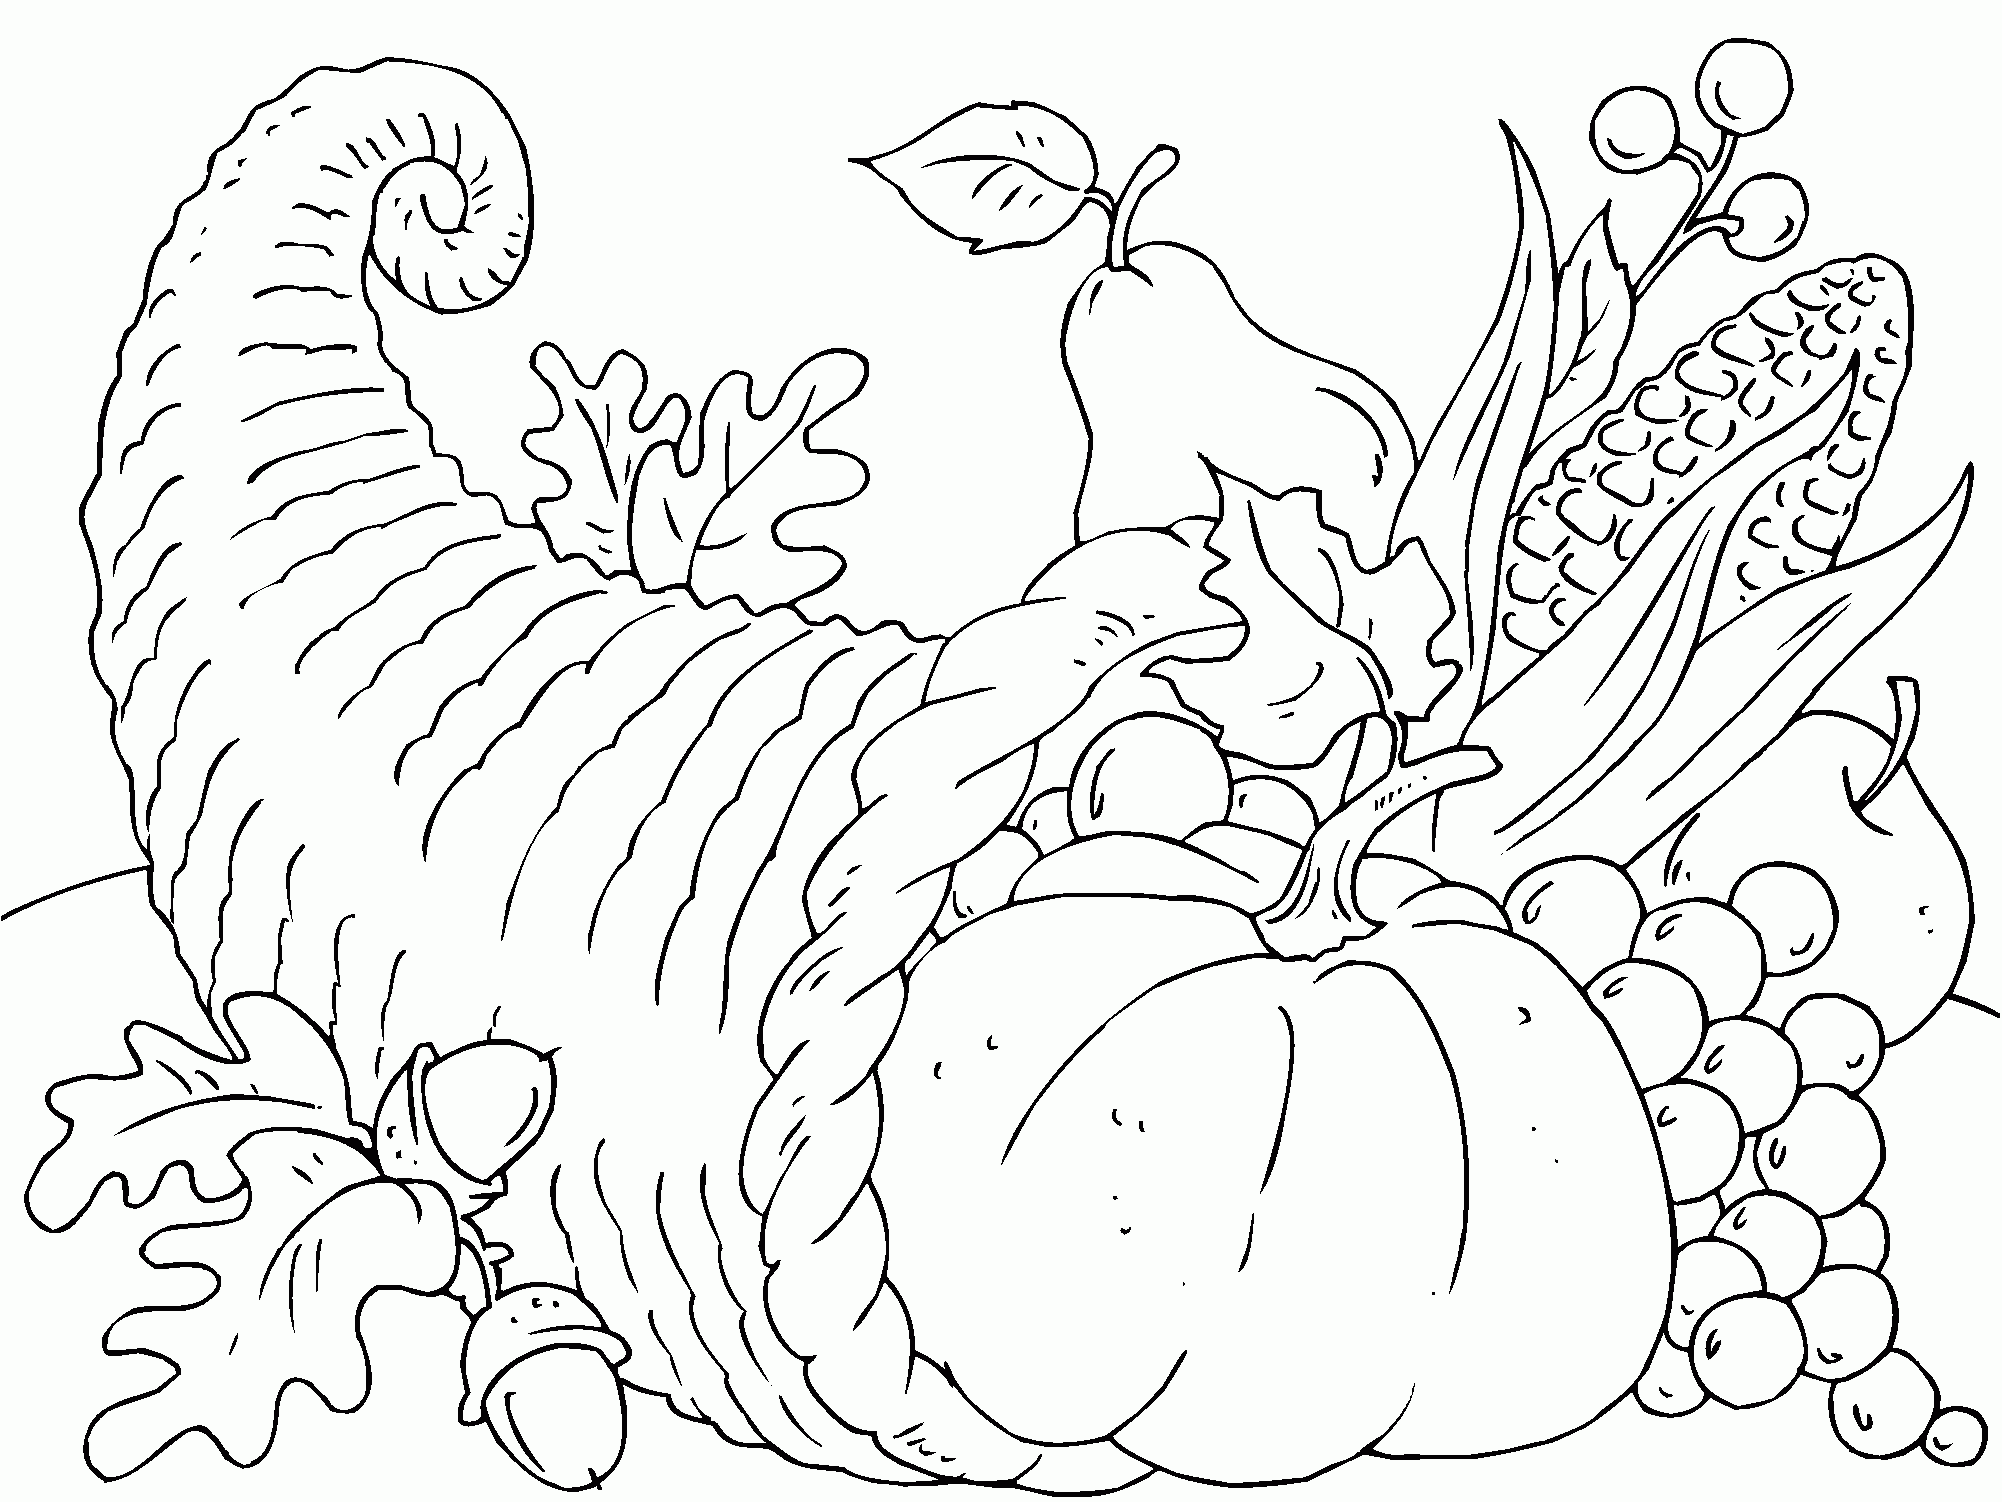 brilliant Thanksgiving Day Coloring Pages for printable for free – free online coloring pages for thanksgiving